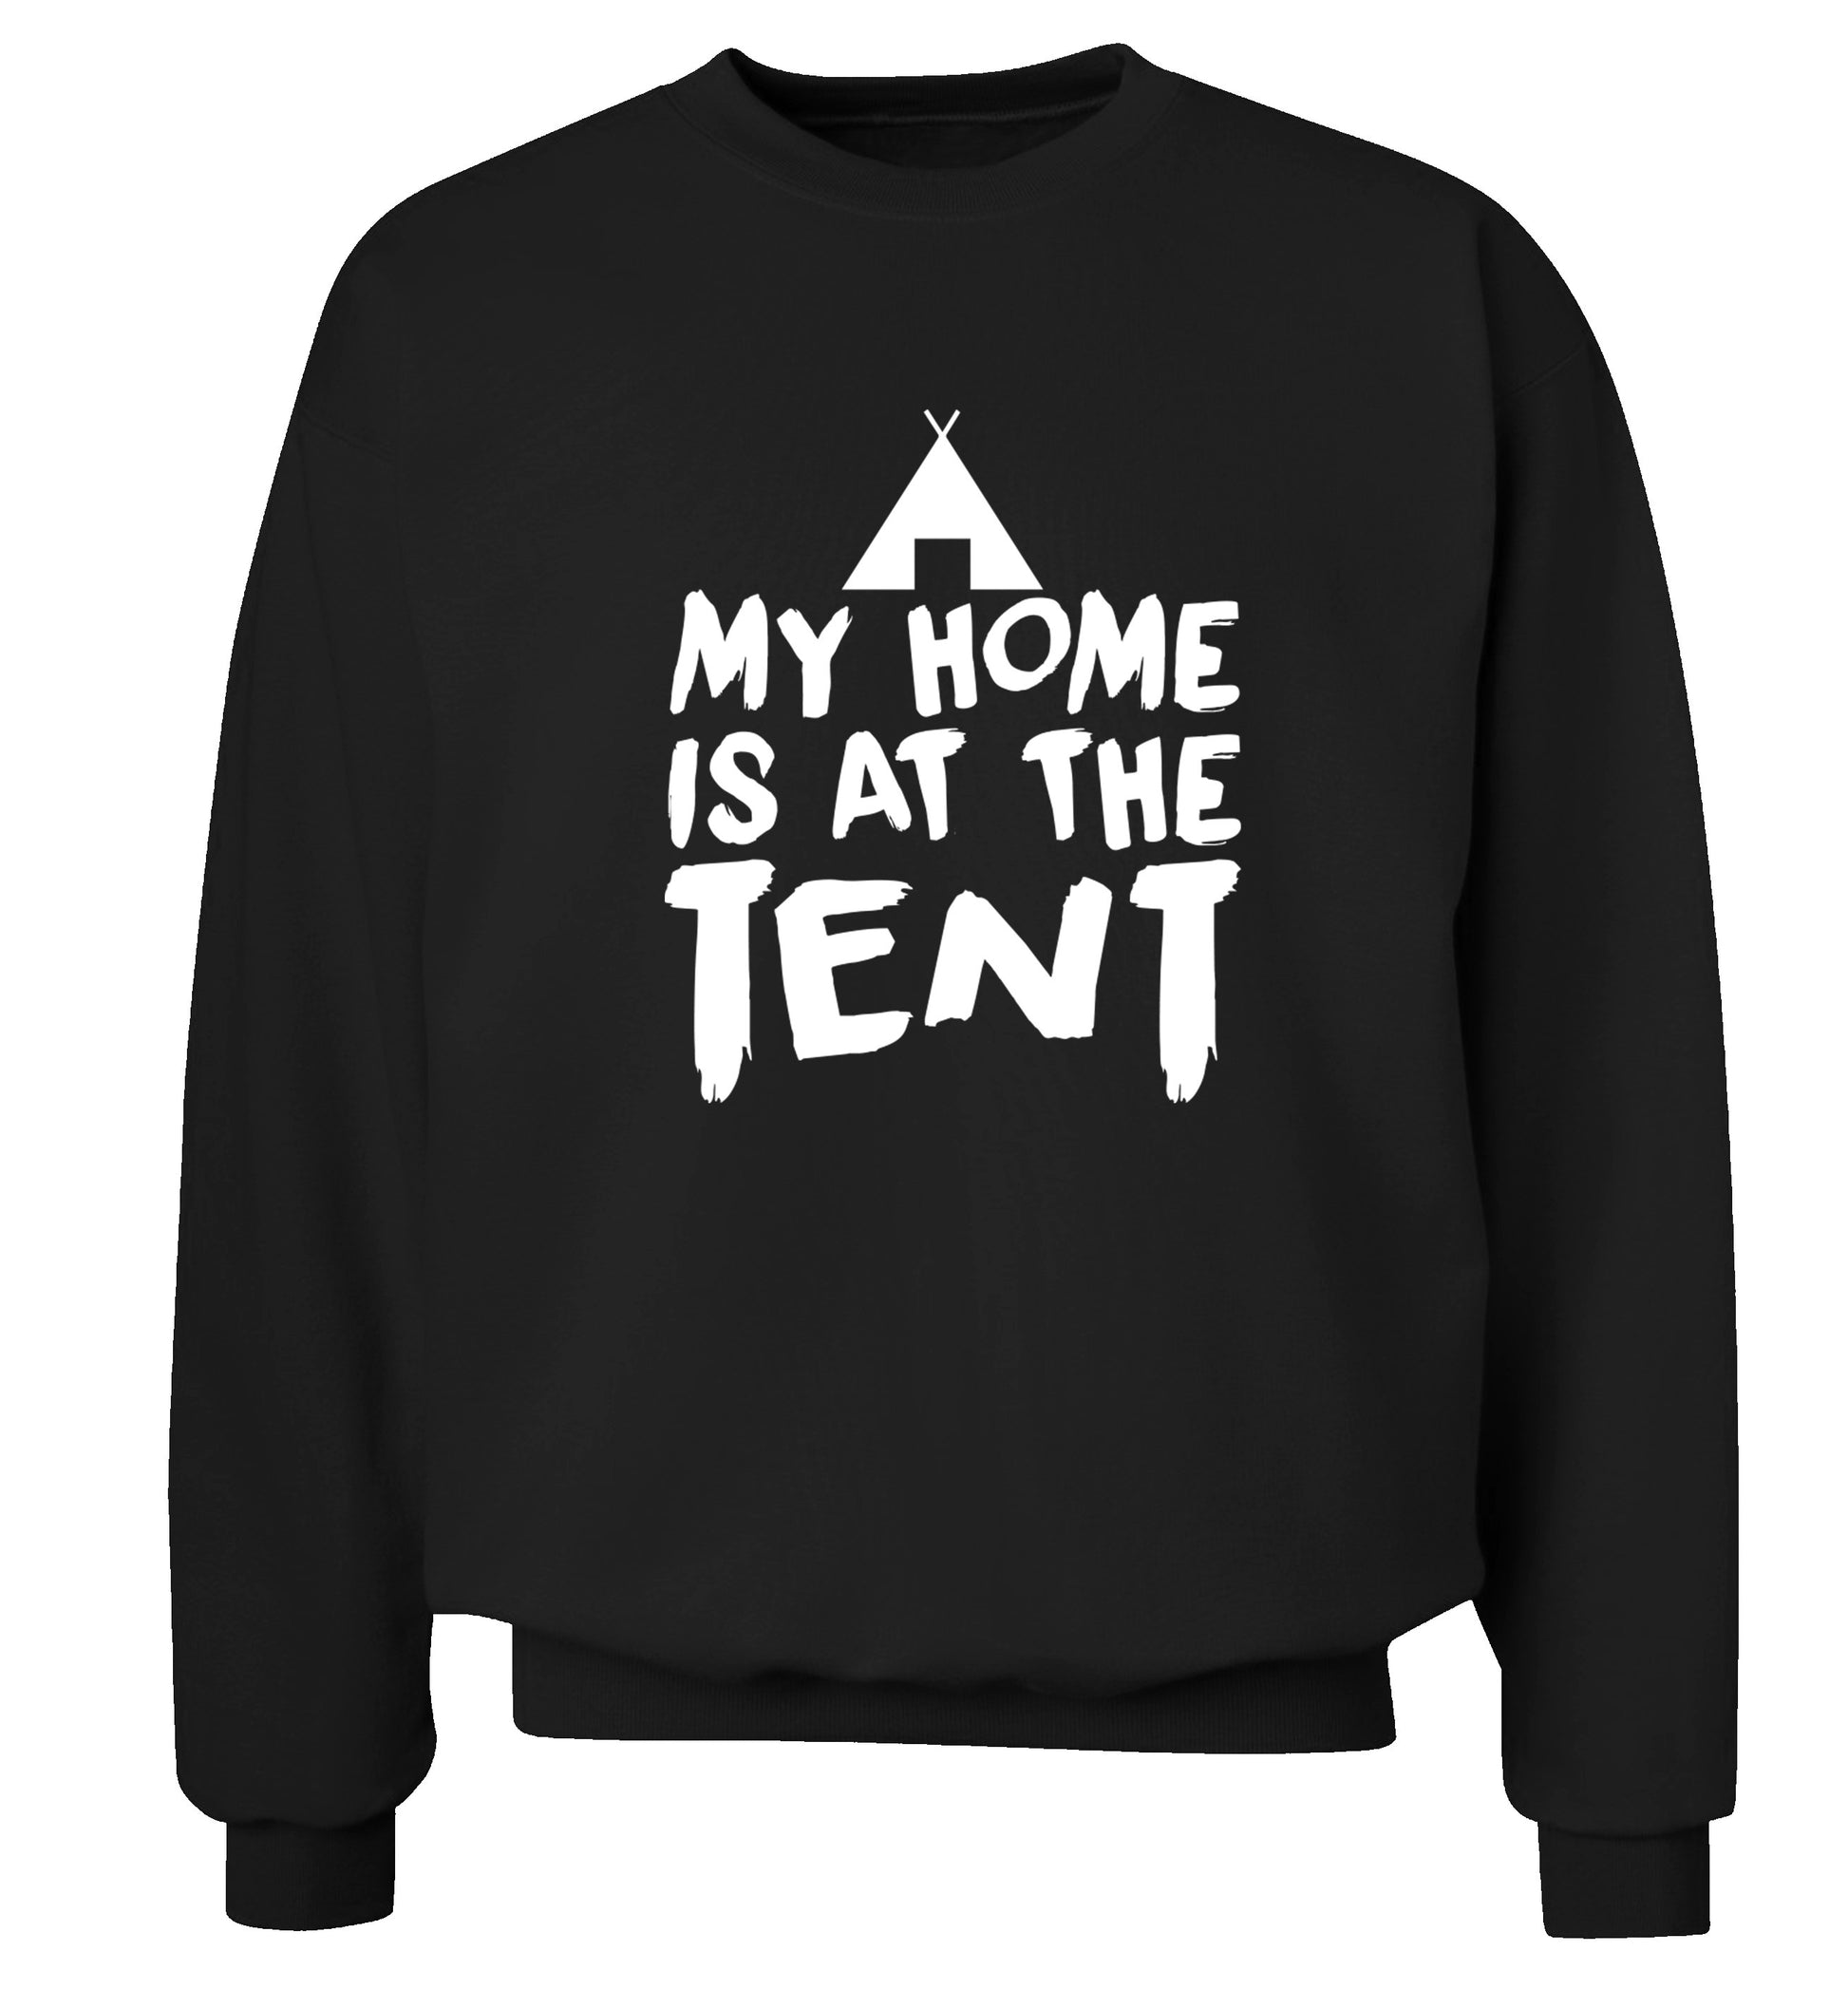 My home is at the tent Adult's unisex black Sweater 2XL